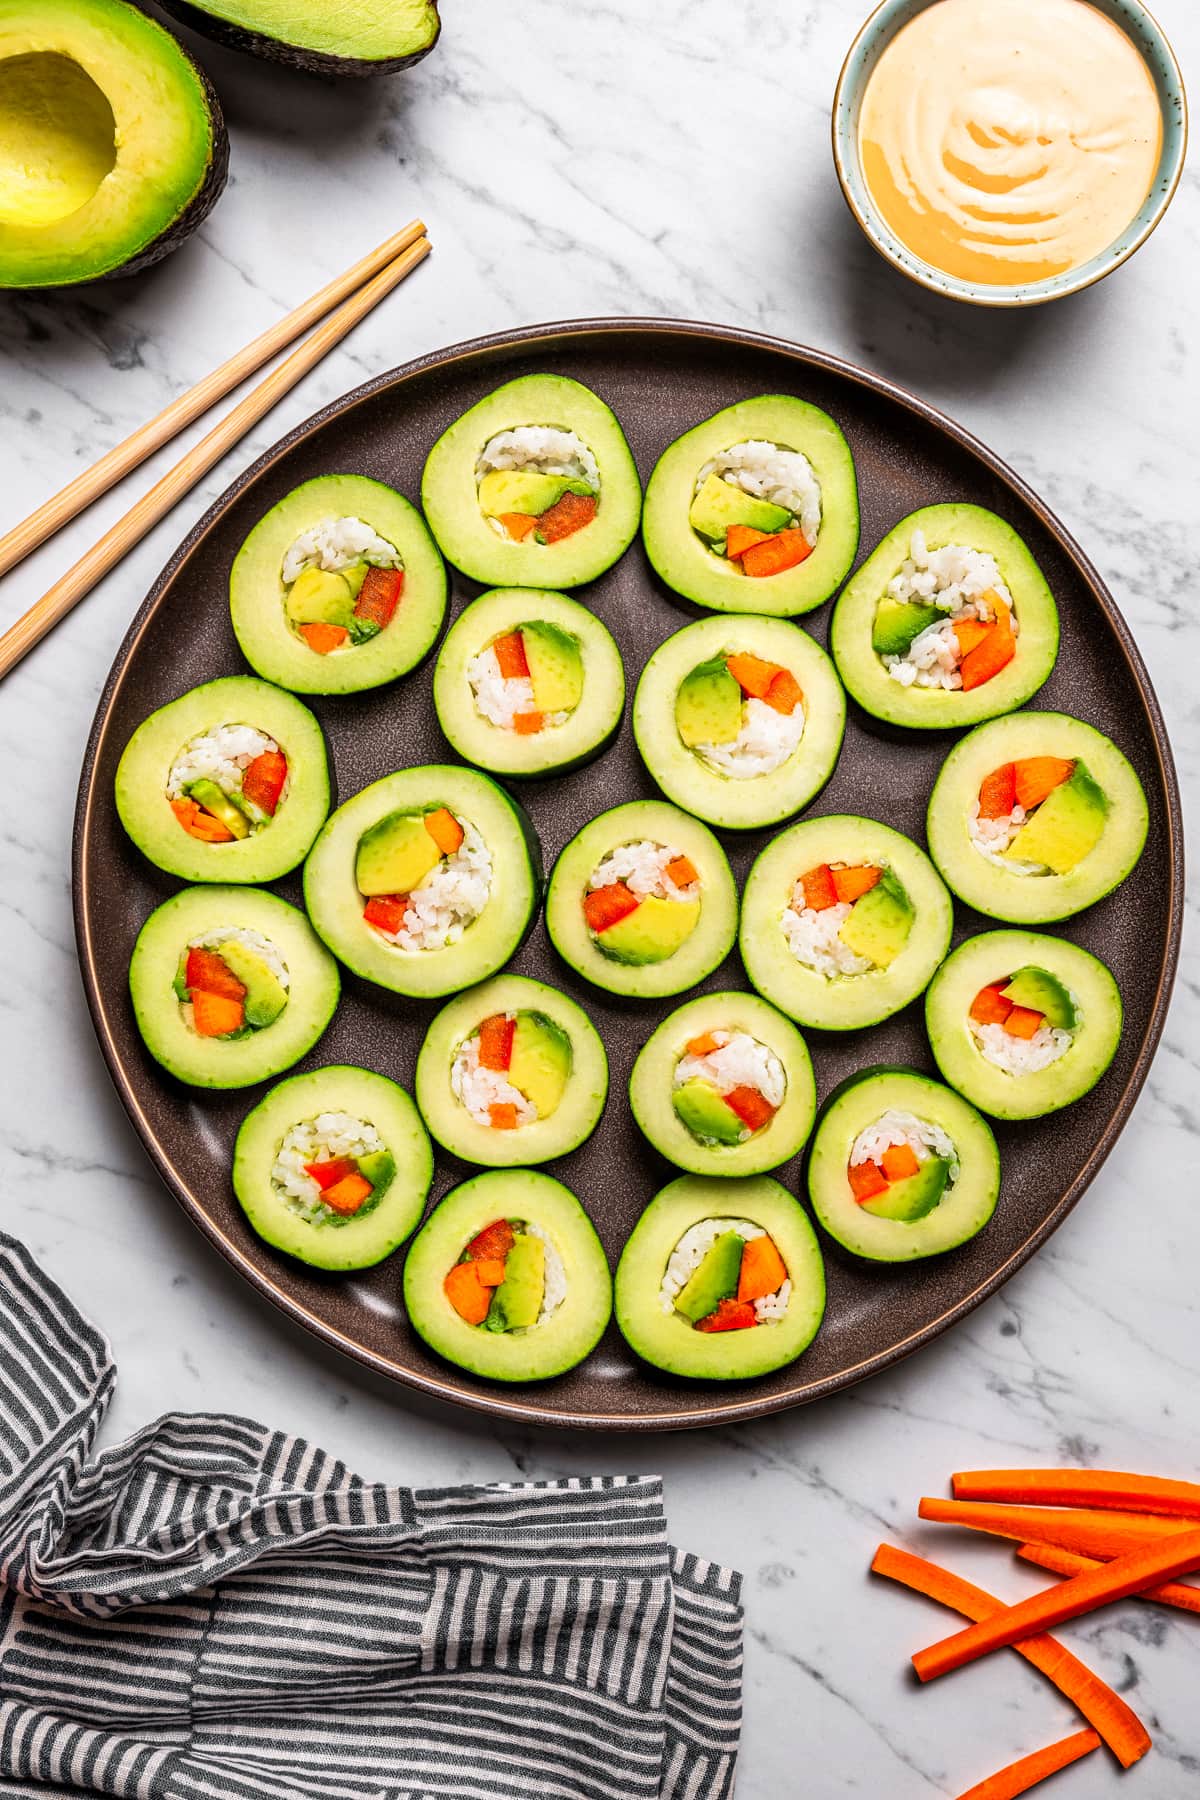 A platter loaded with sliced cucumber rolls.